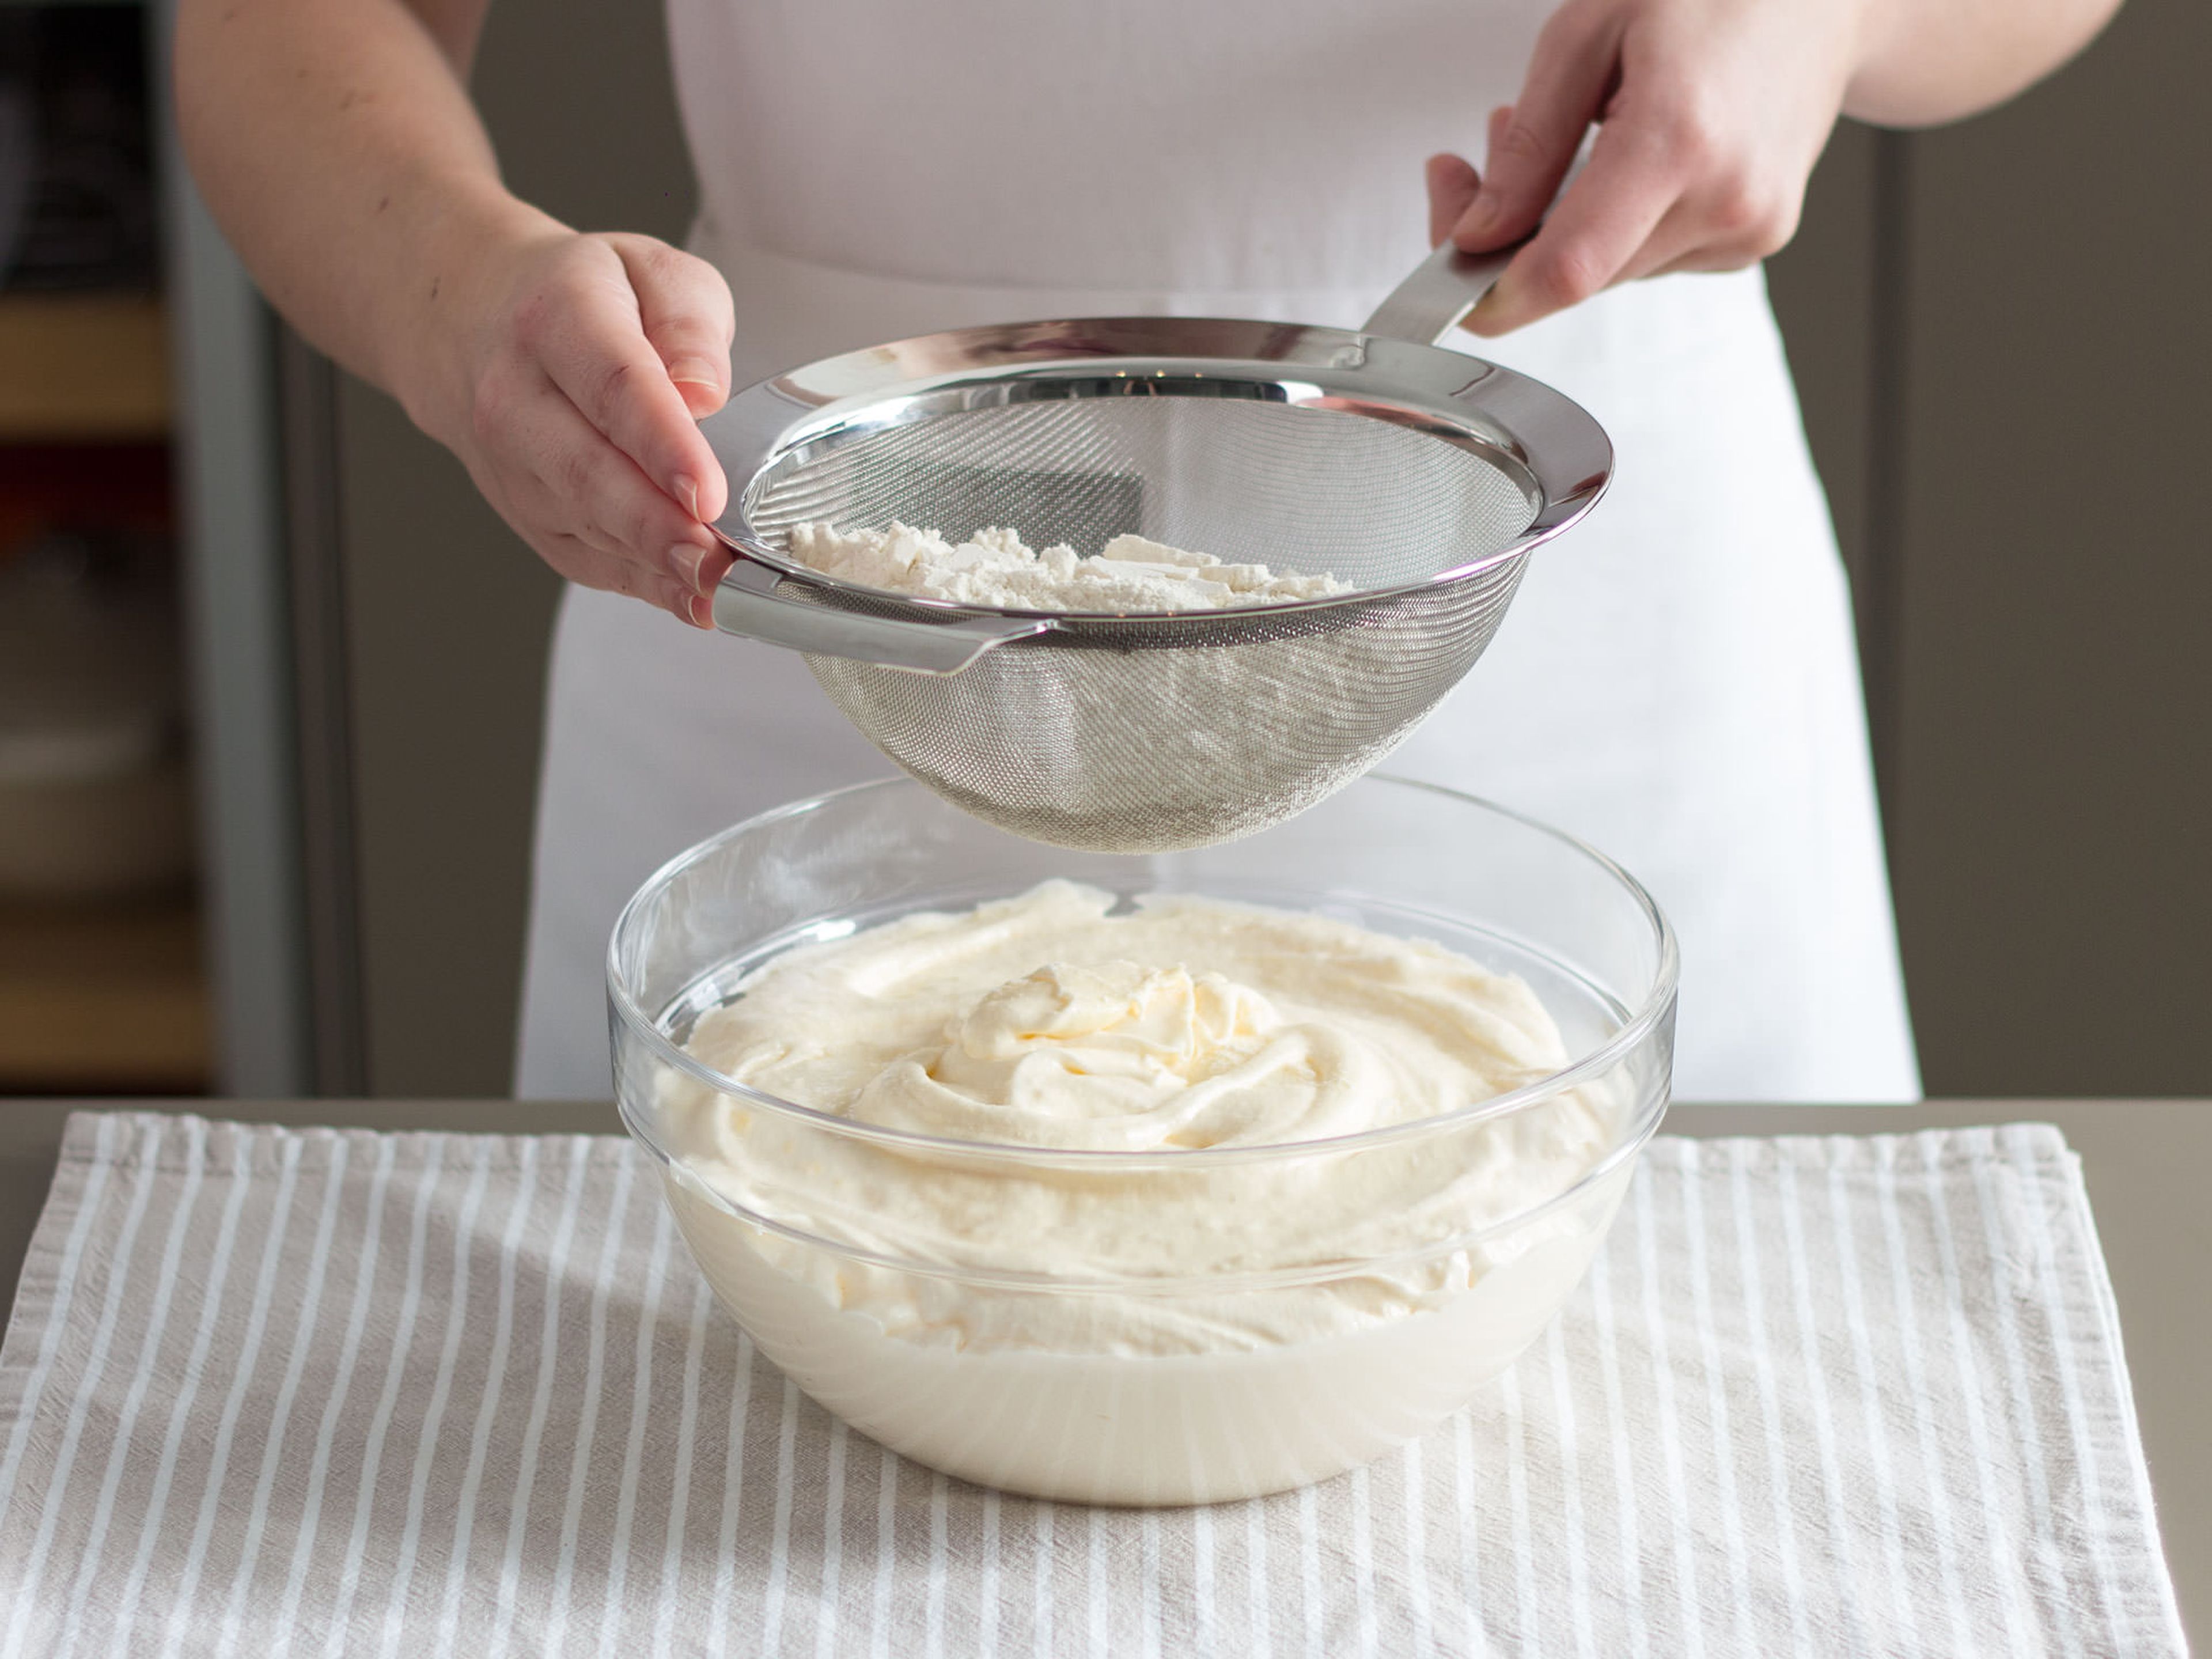 Sift in flour and mix well to combine. In a large bowl, fold egg white mixture into butter mixture. Next, evenly divide batter into two halves, add cocoa powder to one bowl, and mix well to combine.